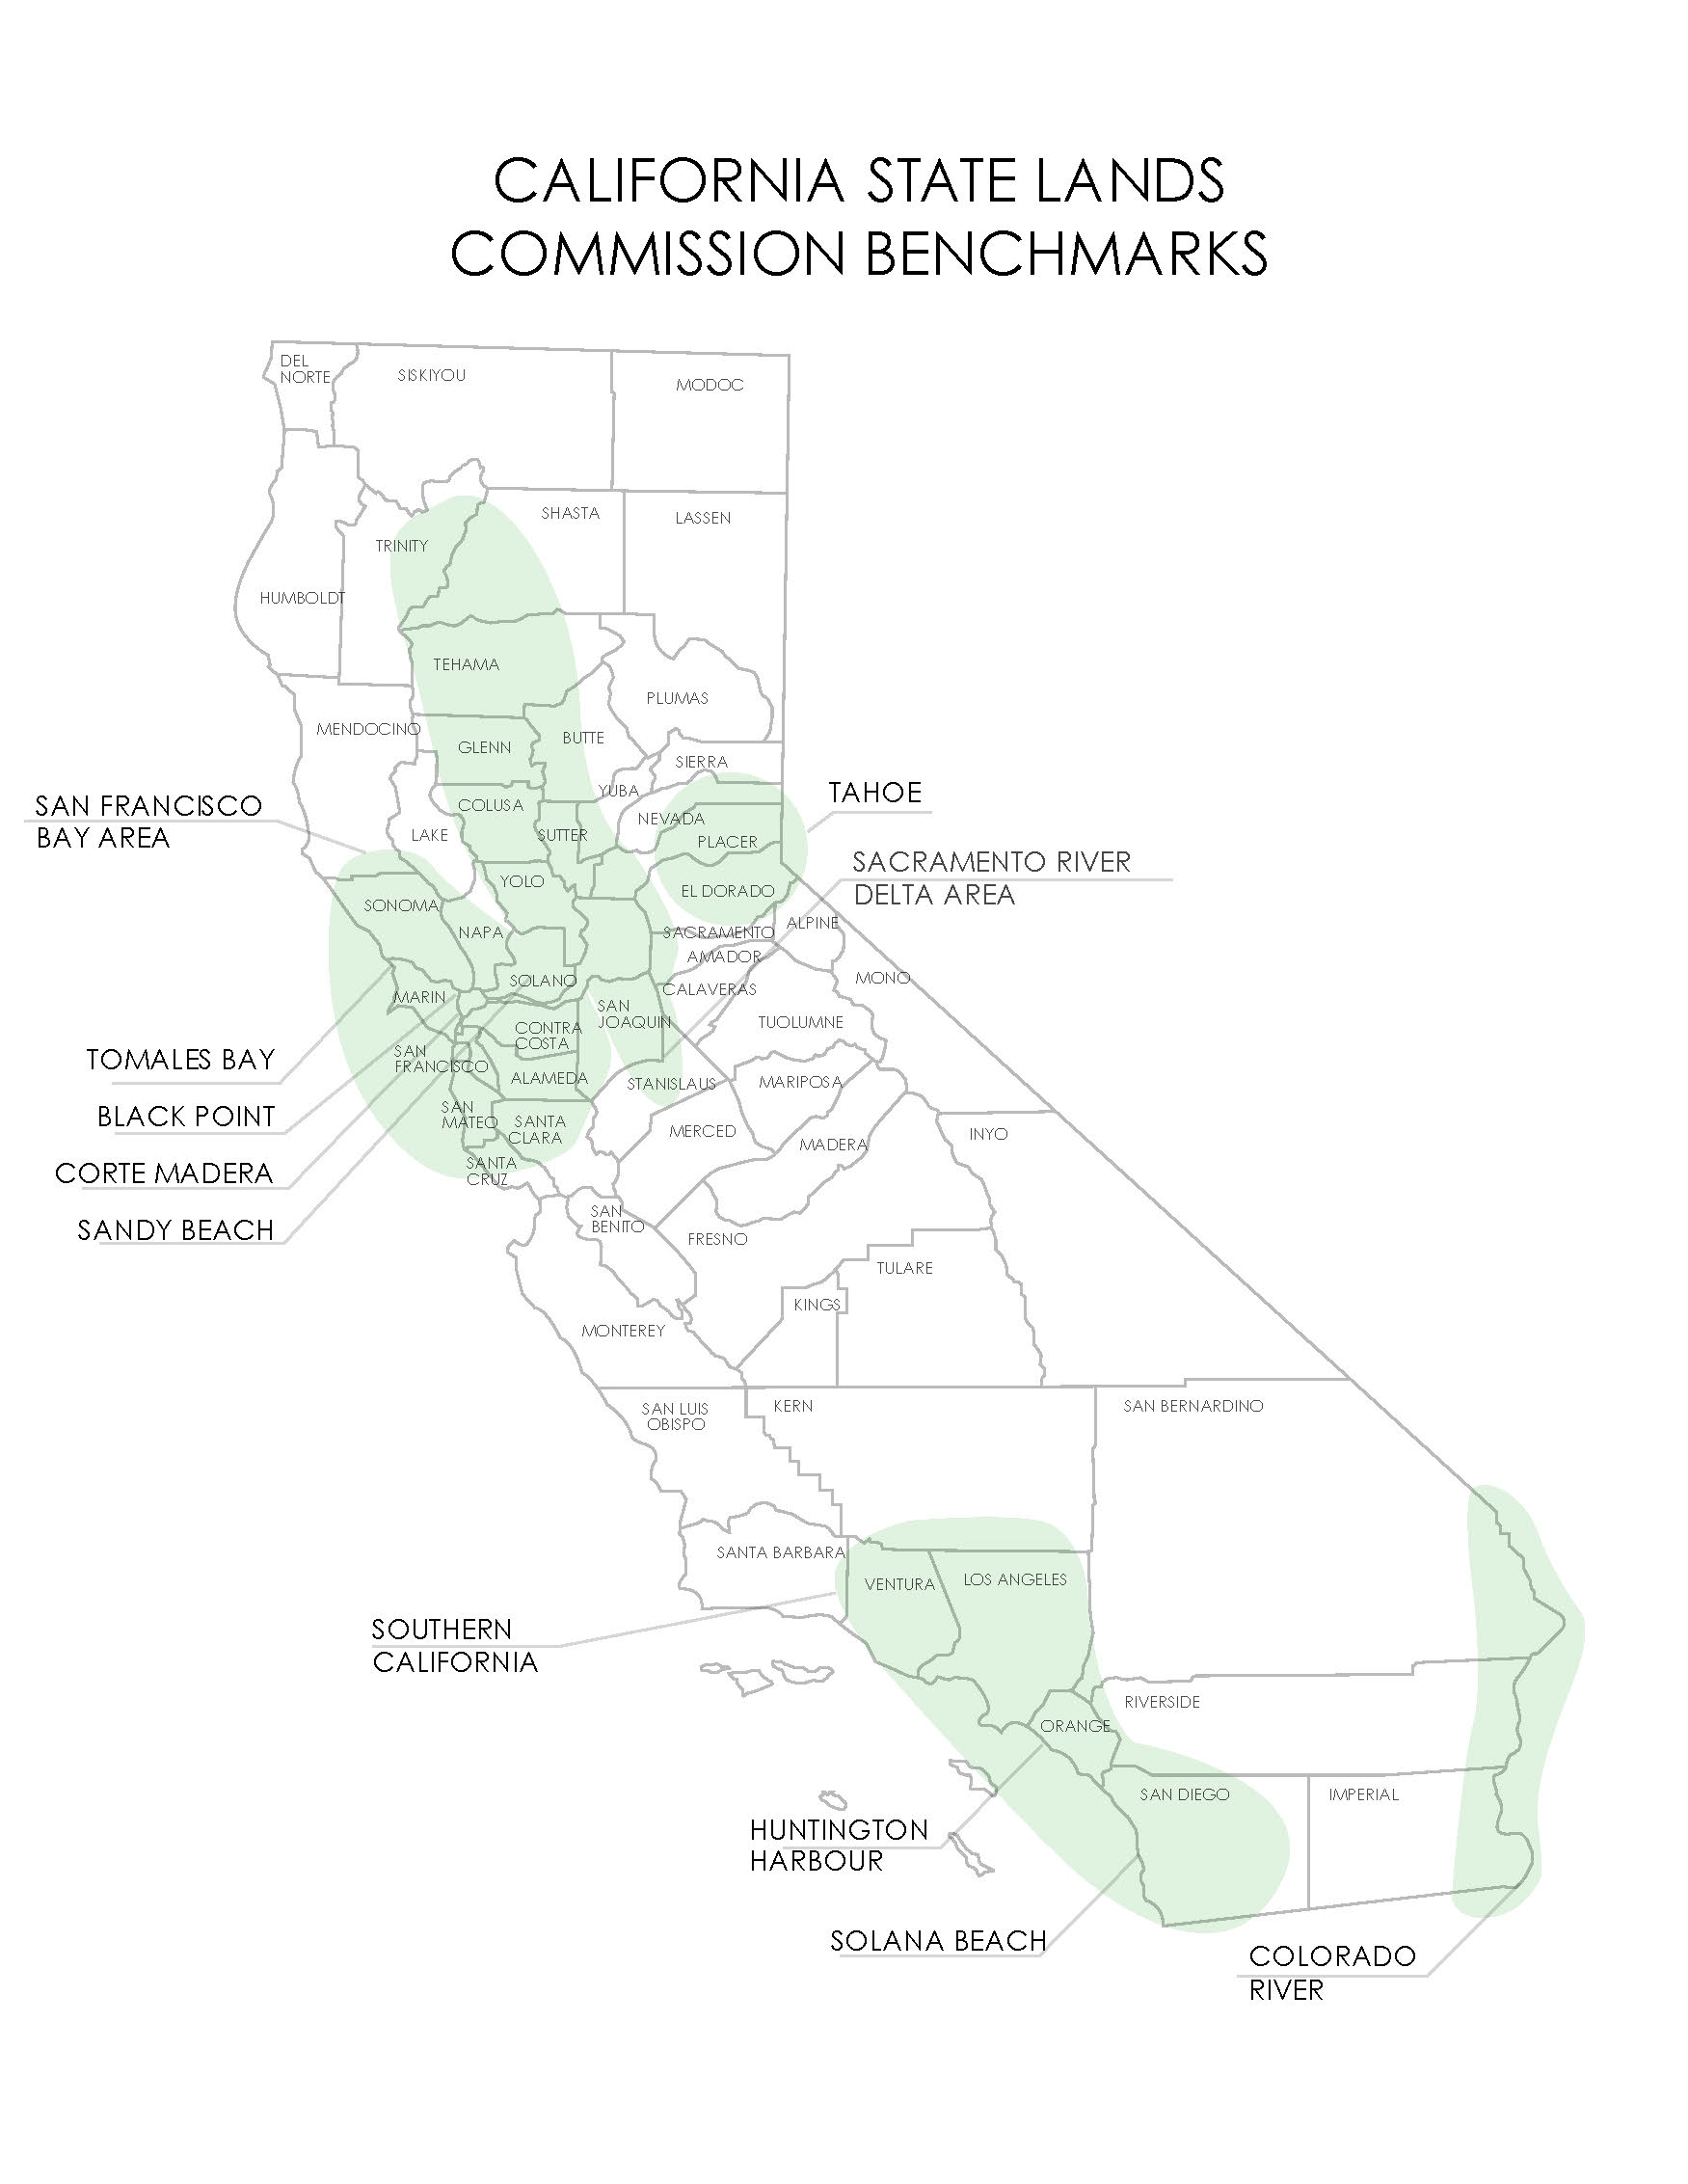 Map of our benchmark areas in the state of California